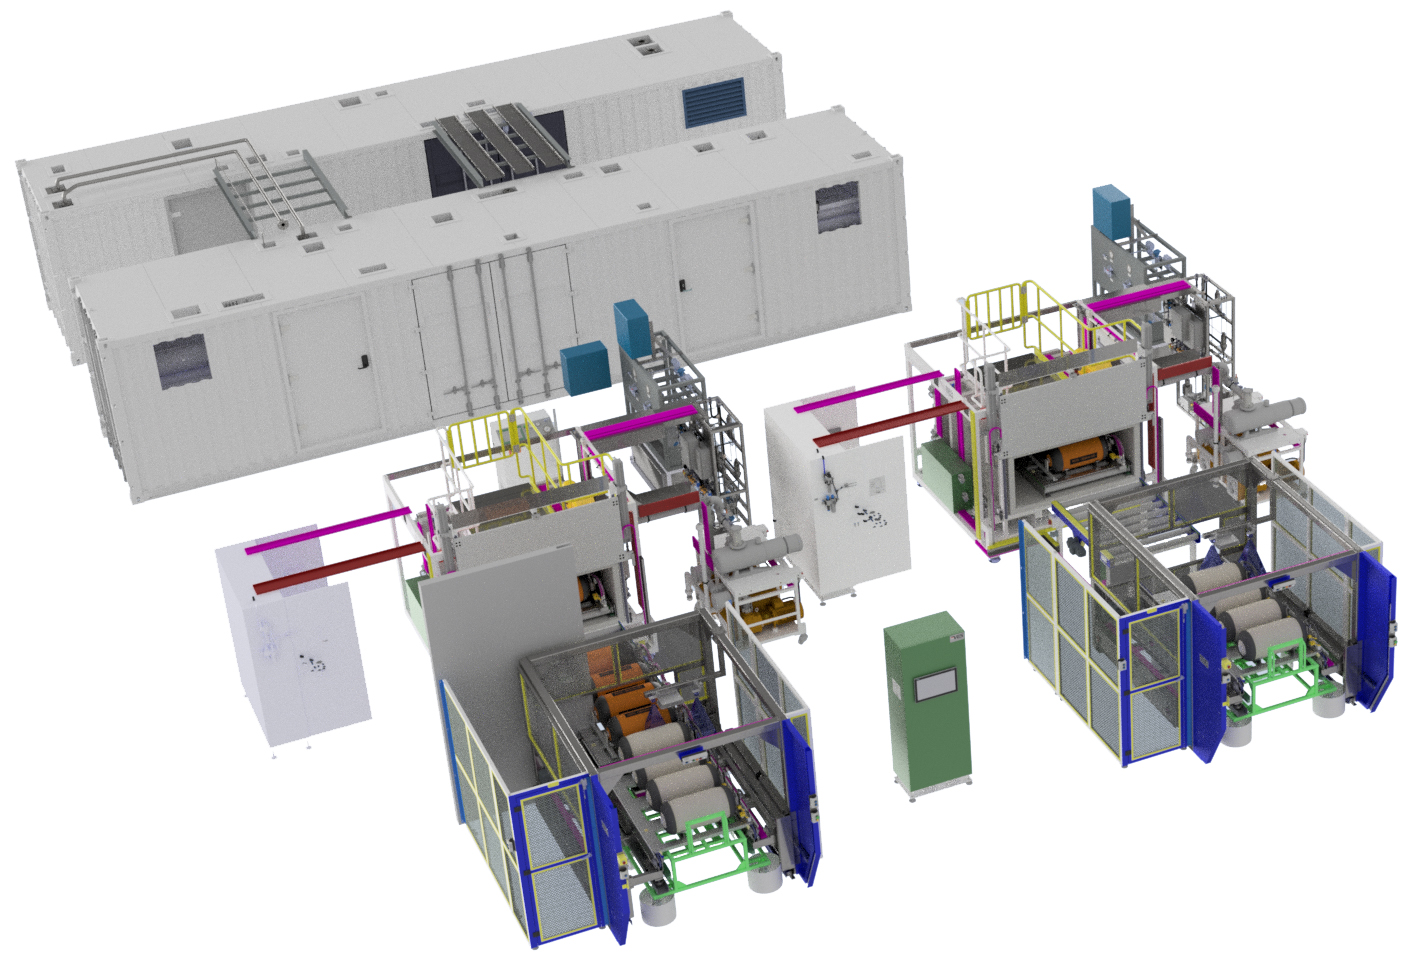 High pressure gas generation and gas processing units, along with leak test modules produced for integration into advanced high volume hydrogen automotive production lines designed for testing high pressure hydrogen fuel tanks